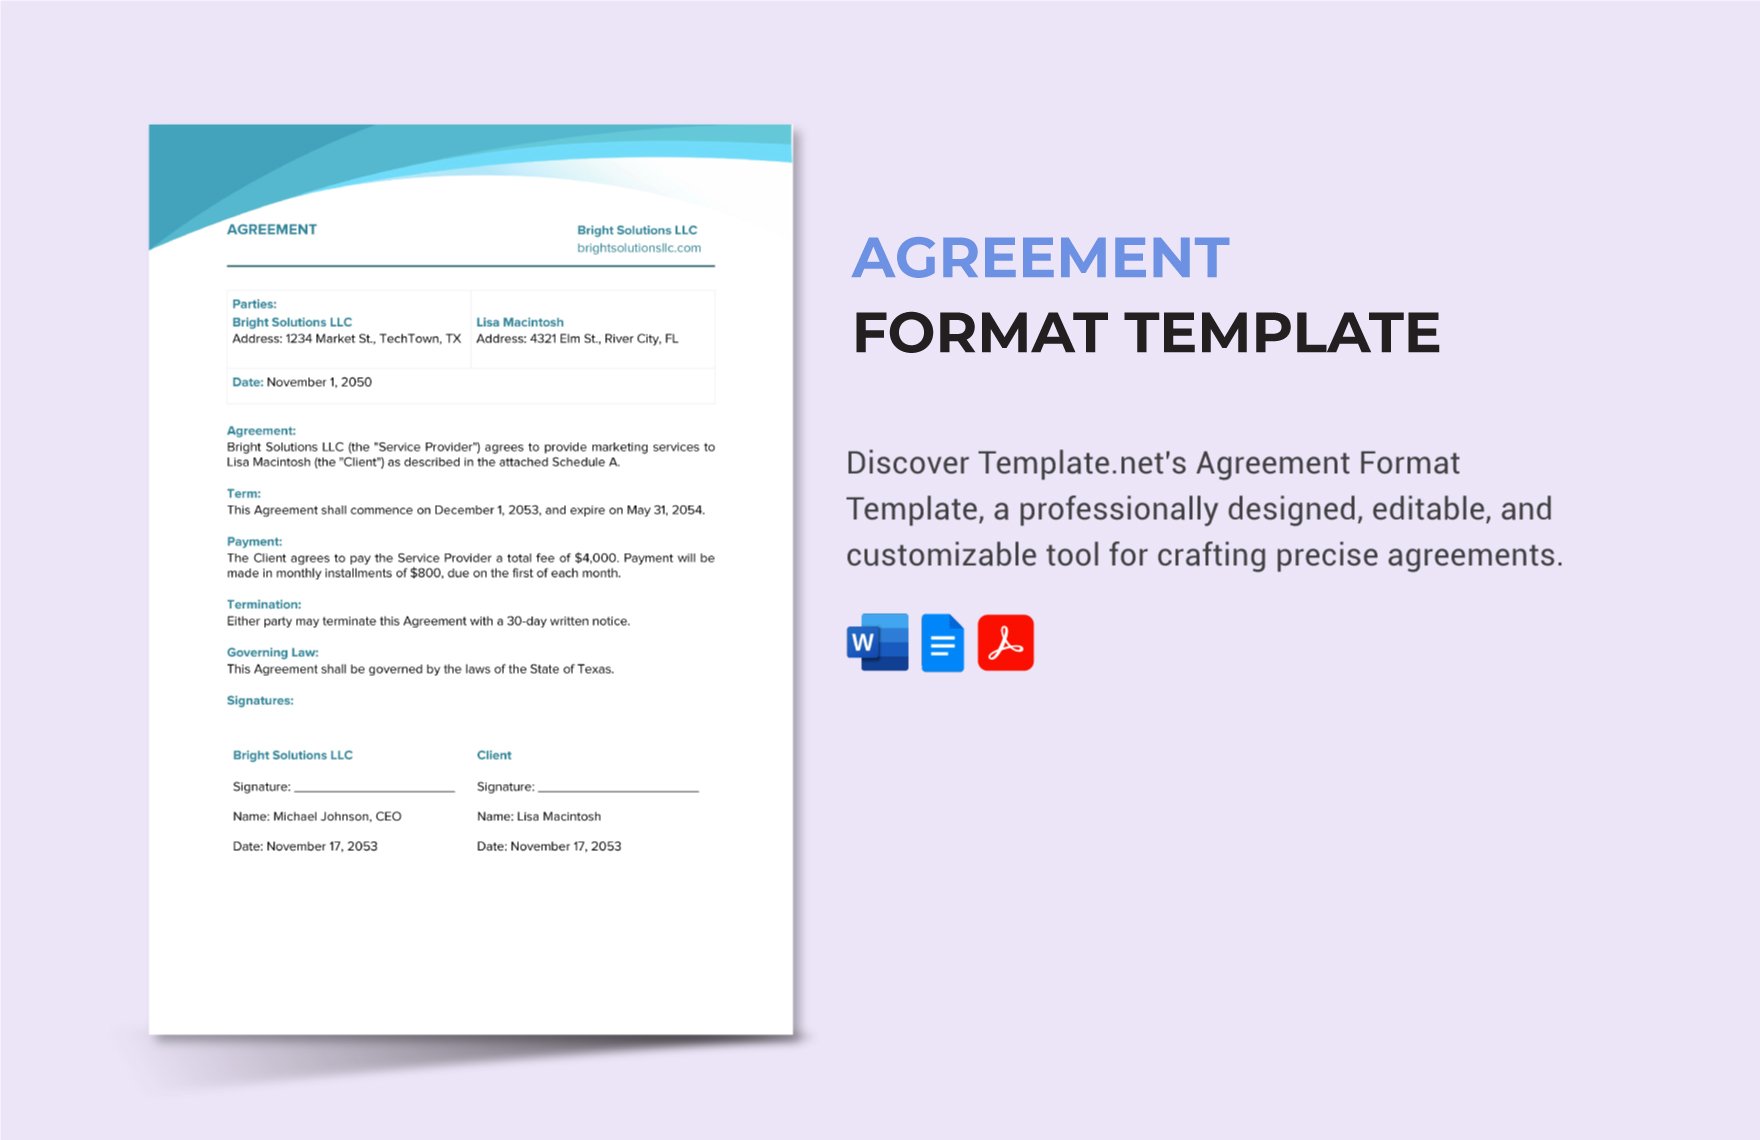 Free Agreement Format Template in Word, Google Docs, PDF